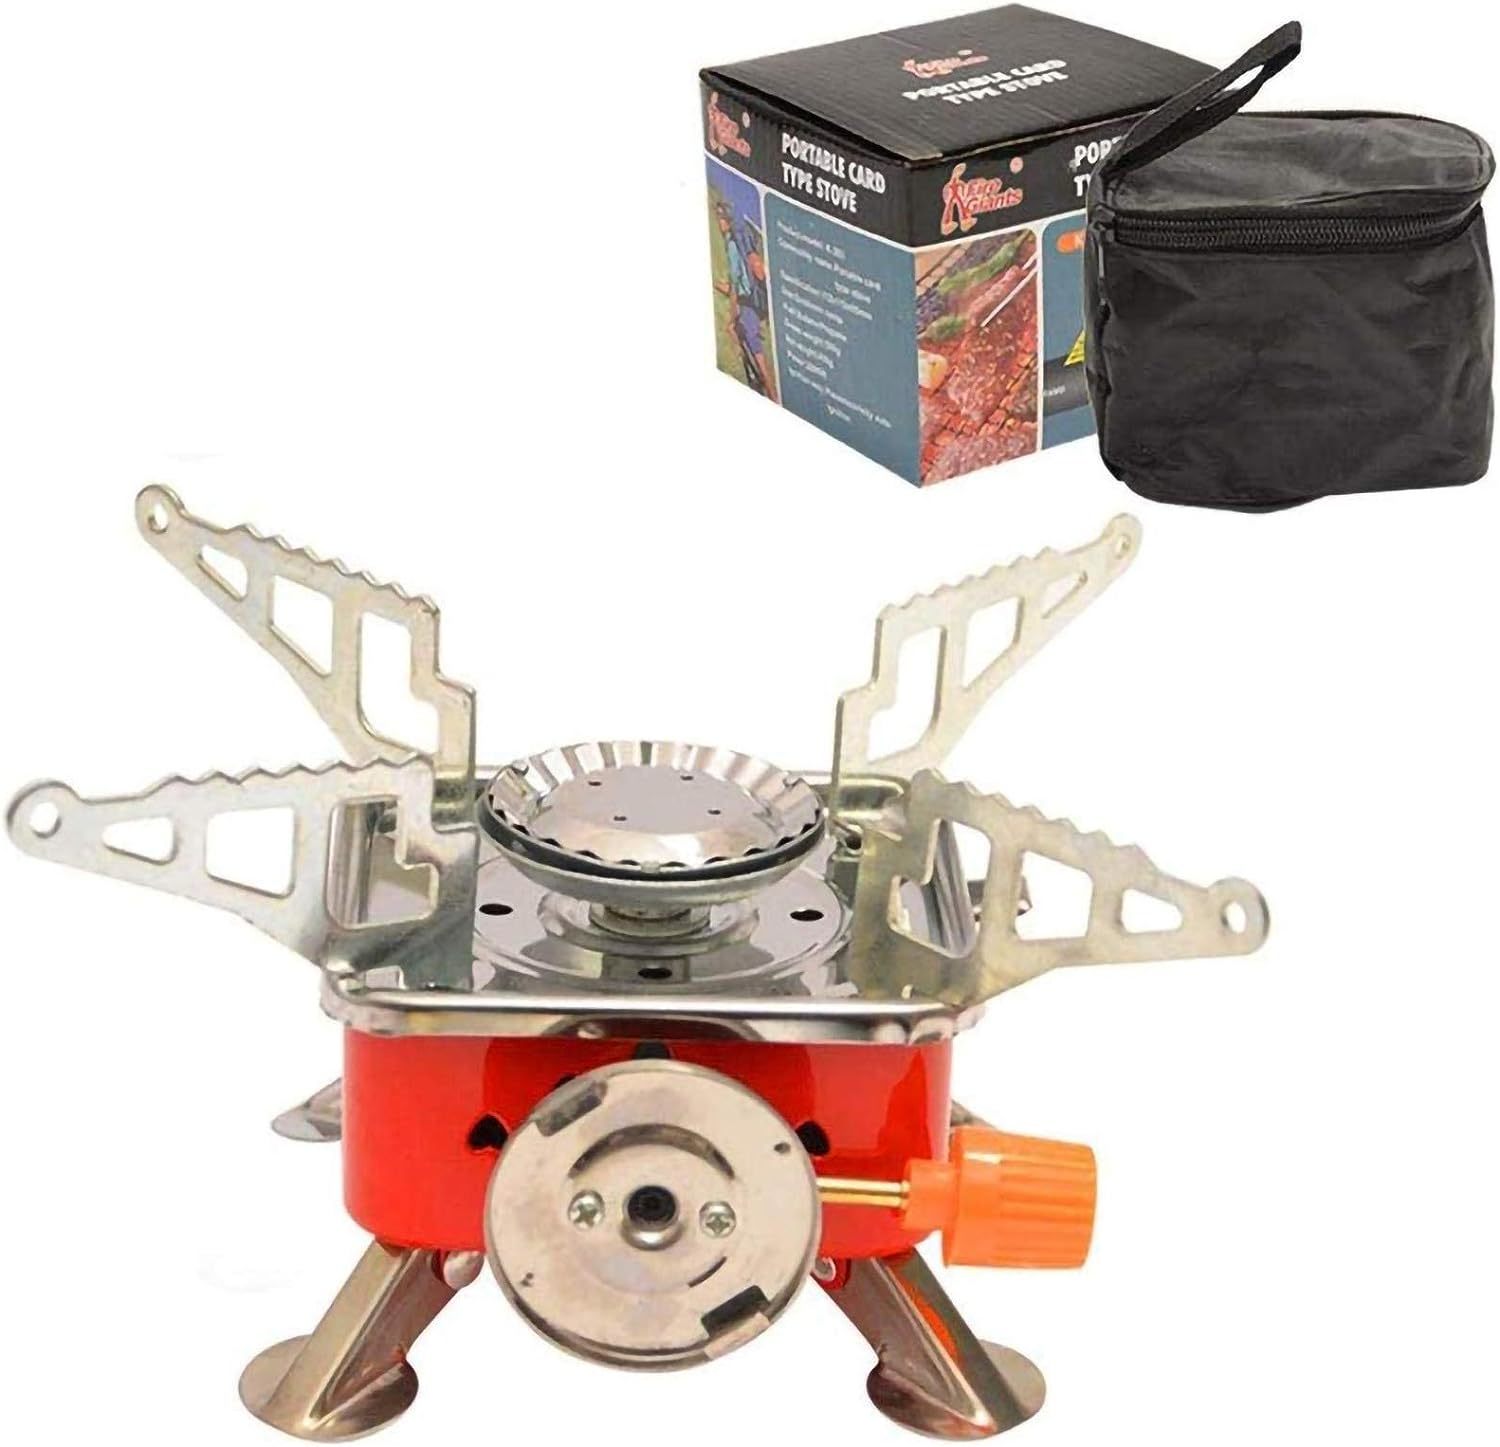 Primary image for Yinsold Lin Windproof Foldable Stove Burner-Ultralight Portable Mini Outdoor